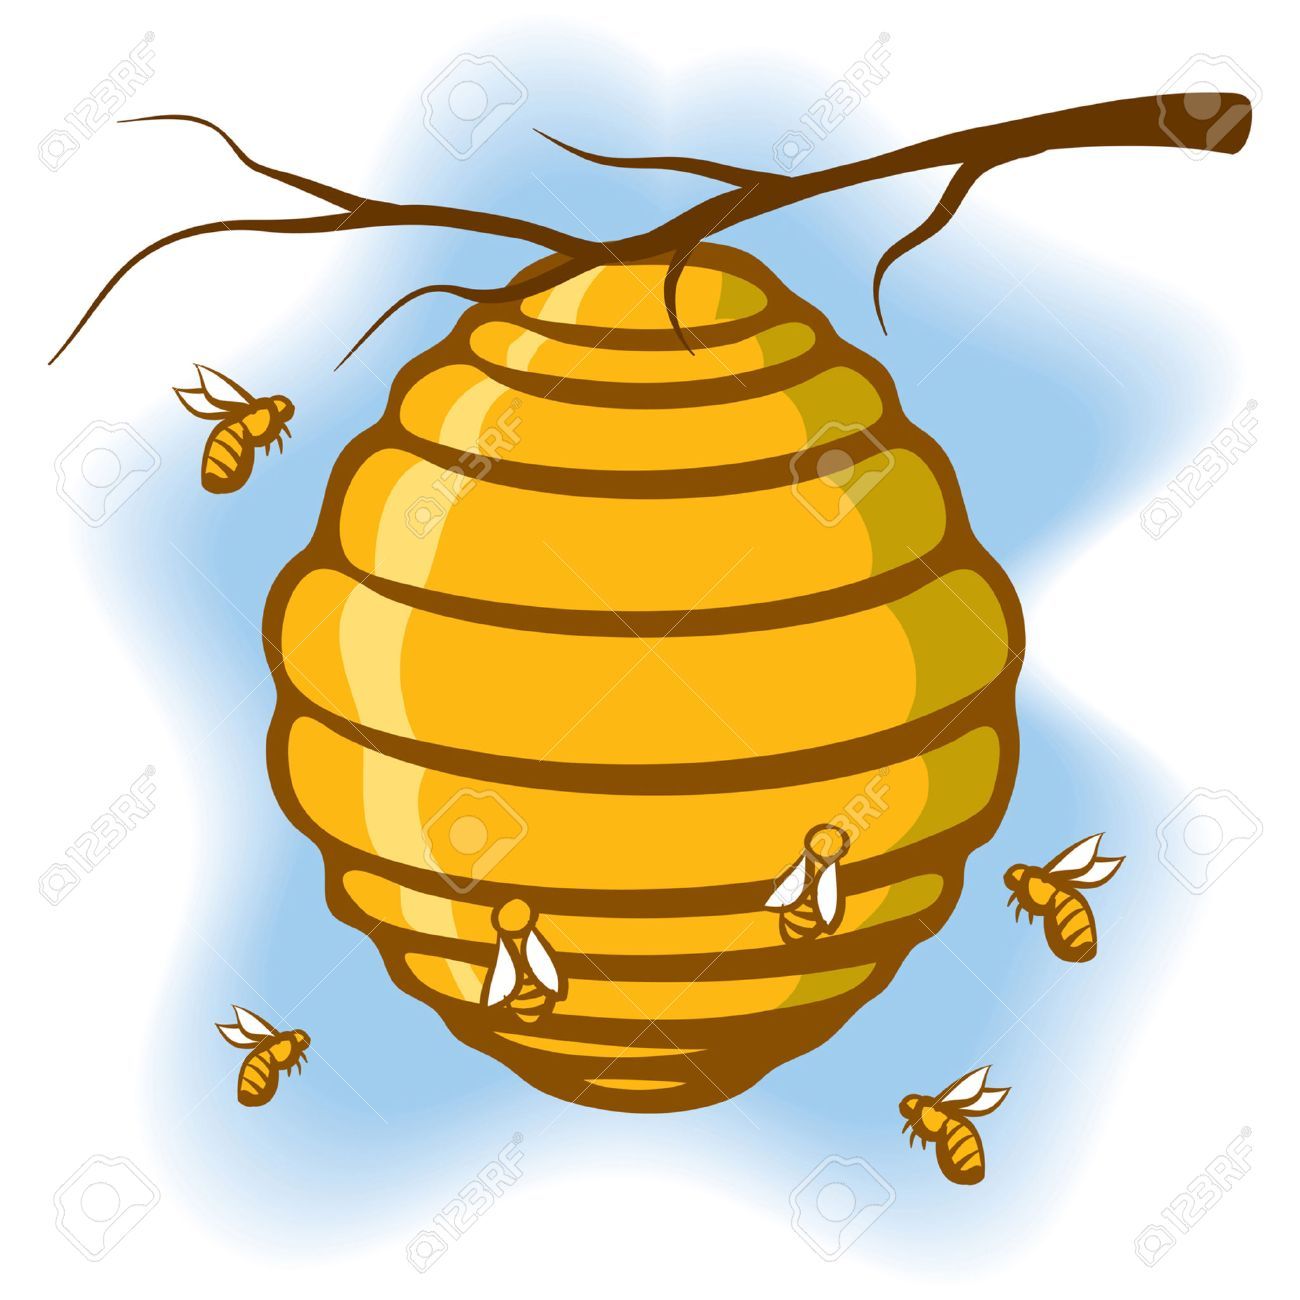 Beehive clipart bee box. Animated hive free download